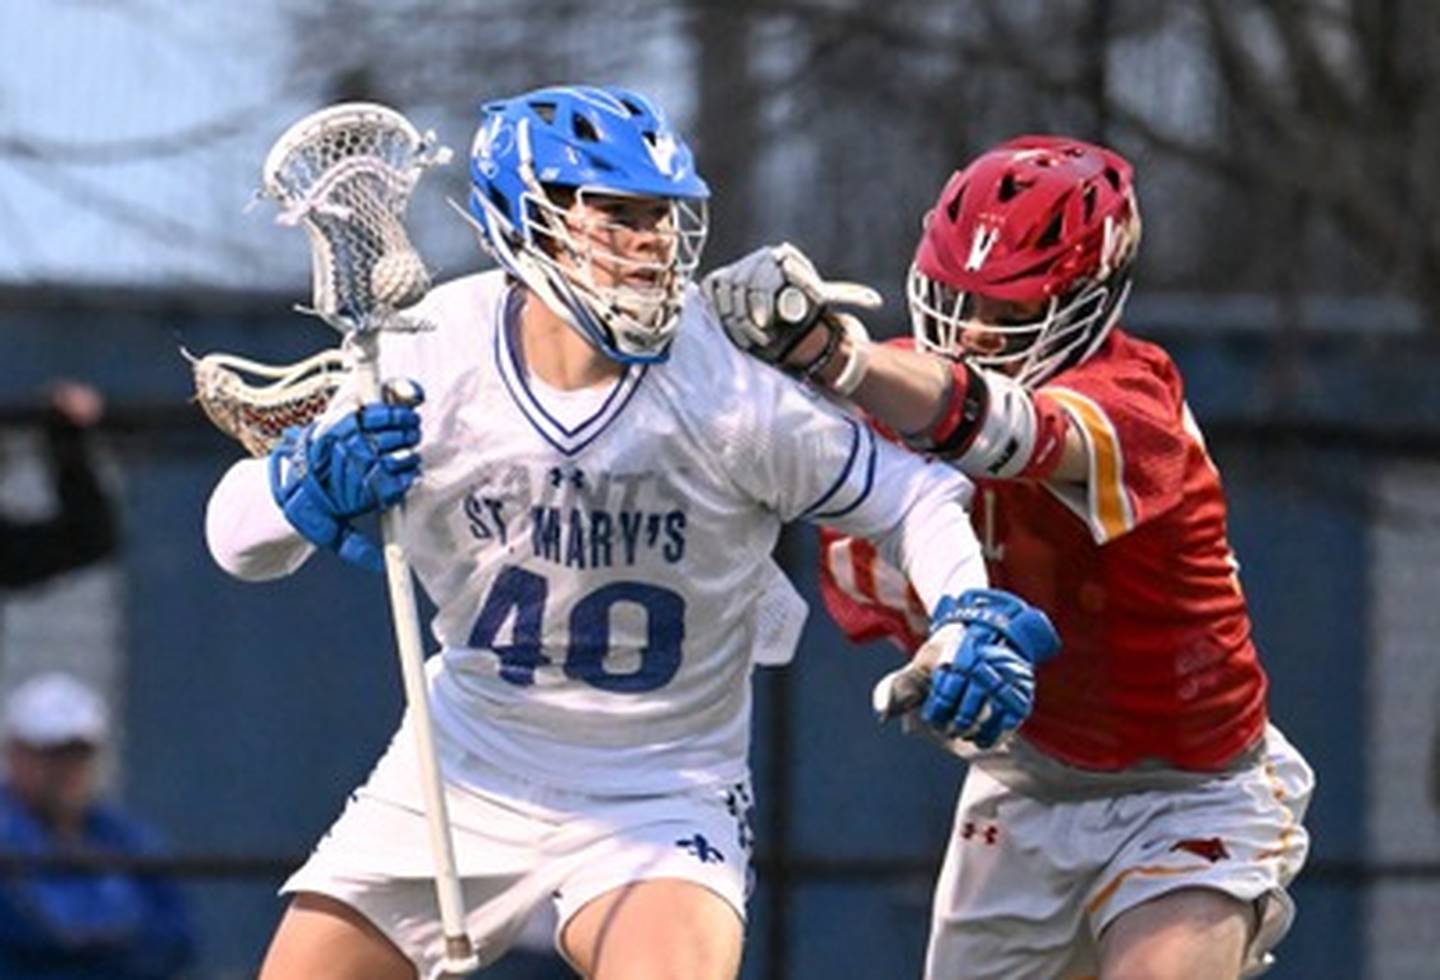 St. Mary's Gavin Burlace (40) works around a Calvert Hall defender during Friday night's MIAA A Conference opener. The University of Notre Dame recruit had 3 goals and 2 assists as the third-ranked Saints defeated No. 5 Calvert Hall, 13-3, at Pascal Field in Annapolis.